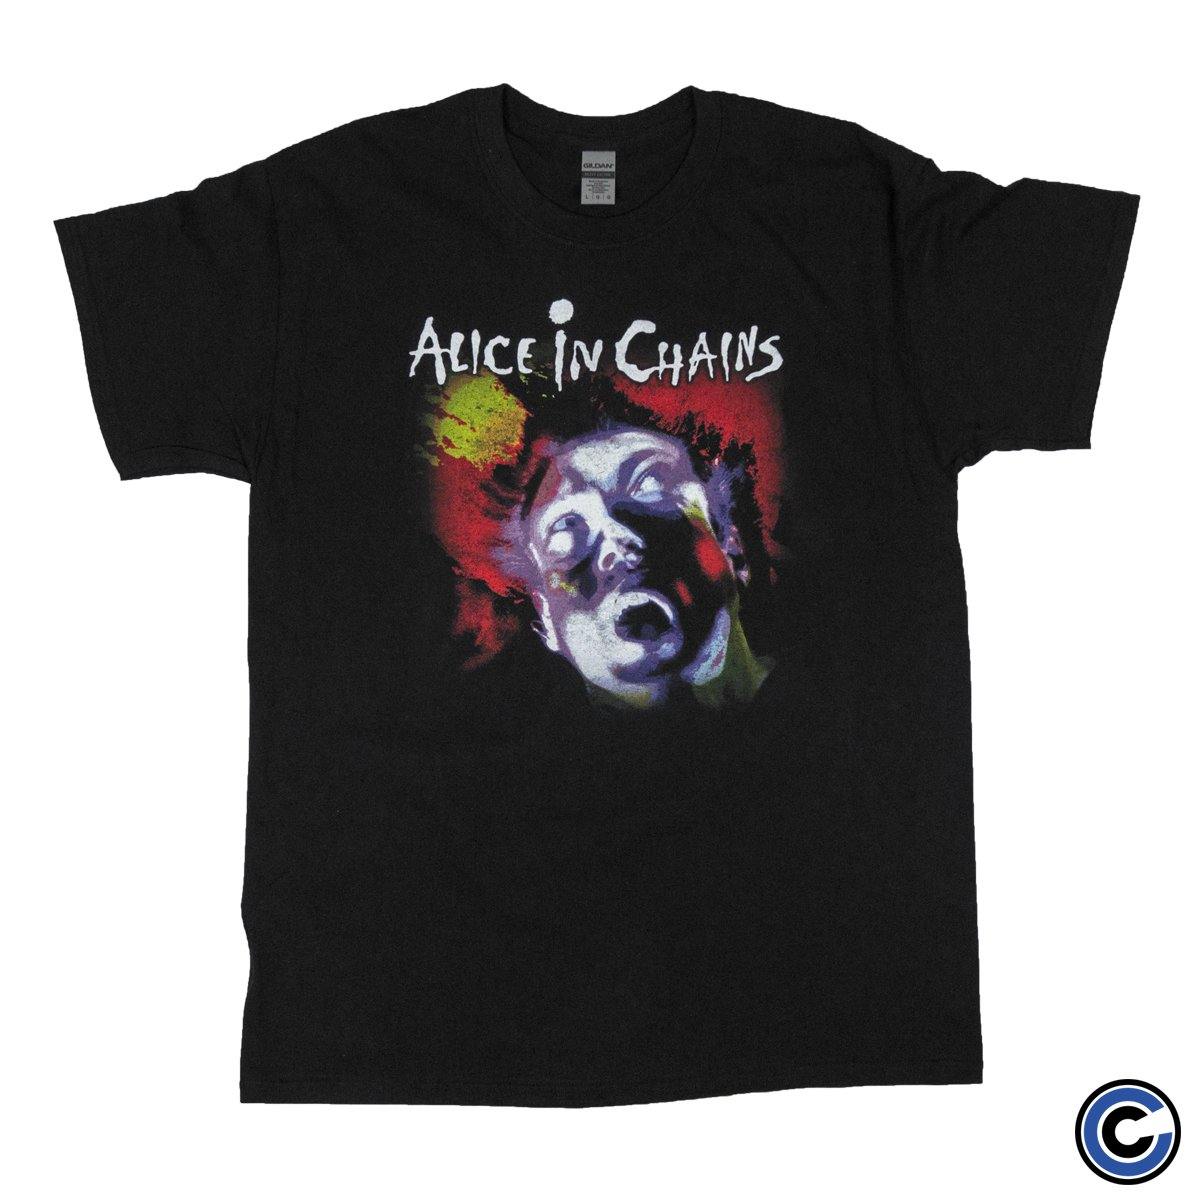 Buy – Alice In Chains "Facebreaker" Shirt – Band & Music Merch – Cold Cuts Merch